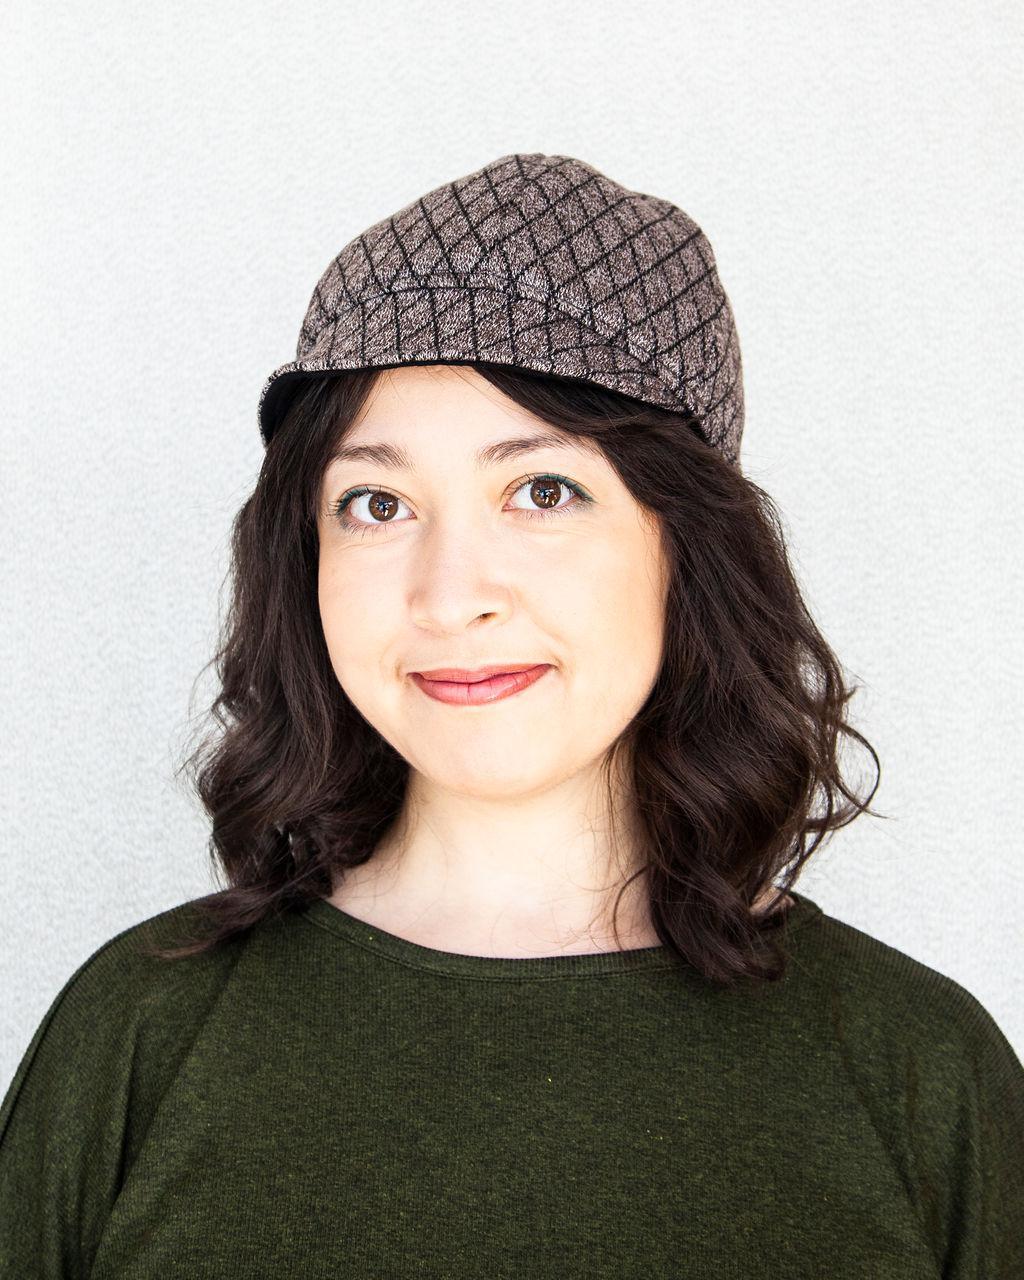 Squasht Bella Hat in Quilted Soft Brown Sweater Knit (Reversible)